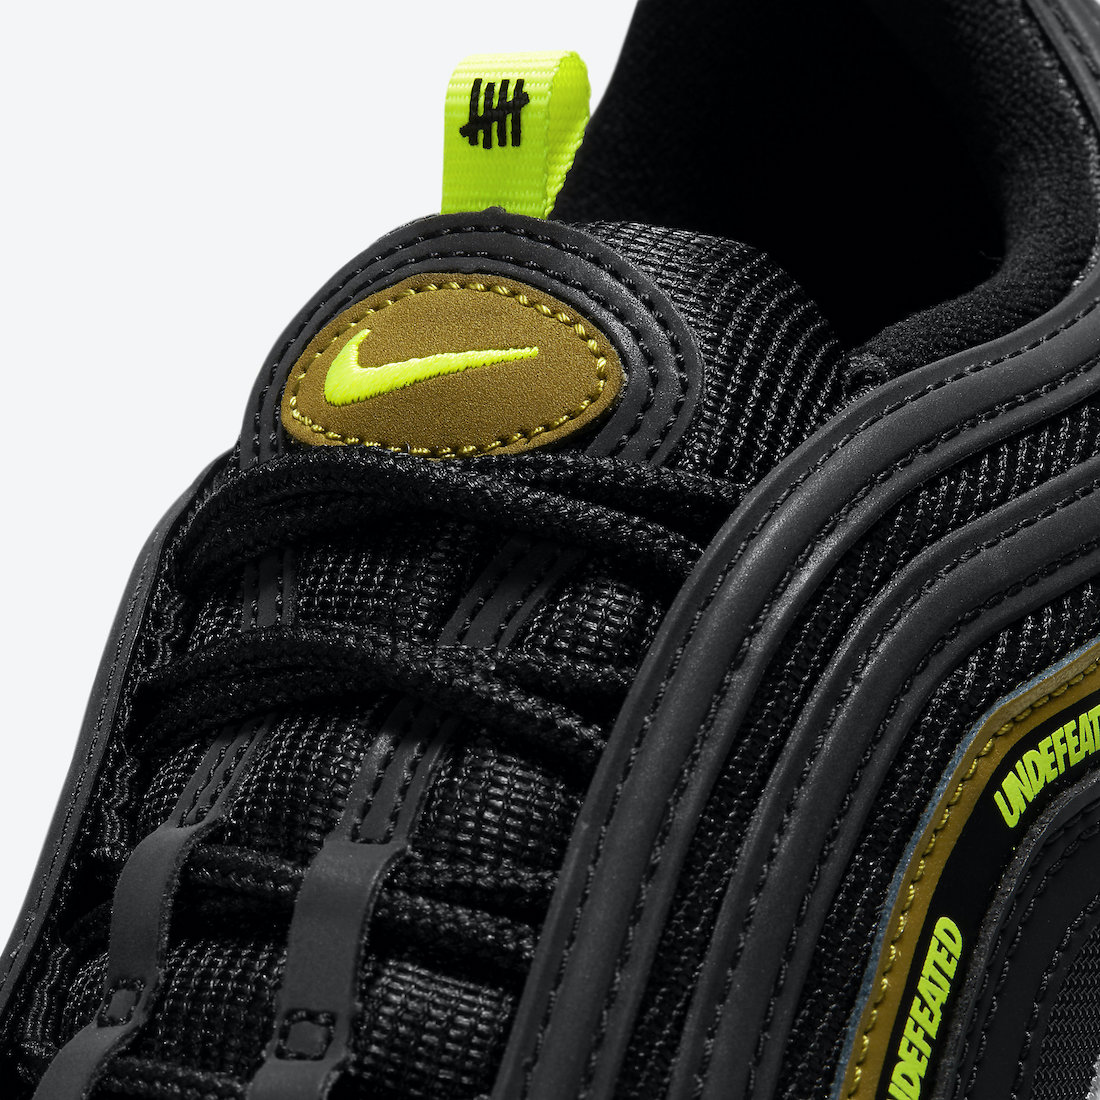 Undefeated Nike Air Max 97 Black Volt DC4830-001 Release Info Price